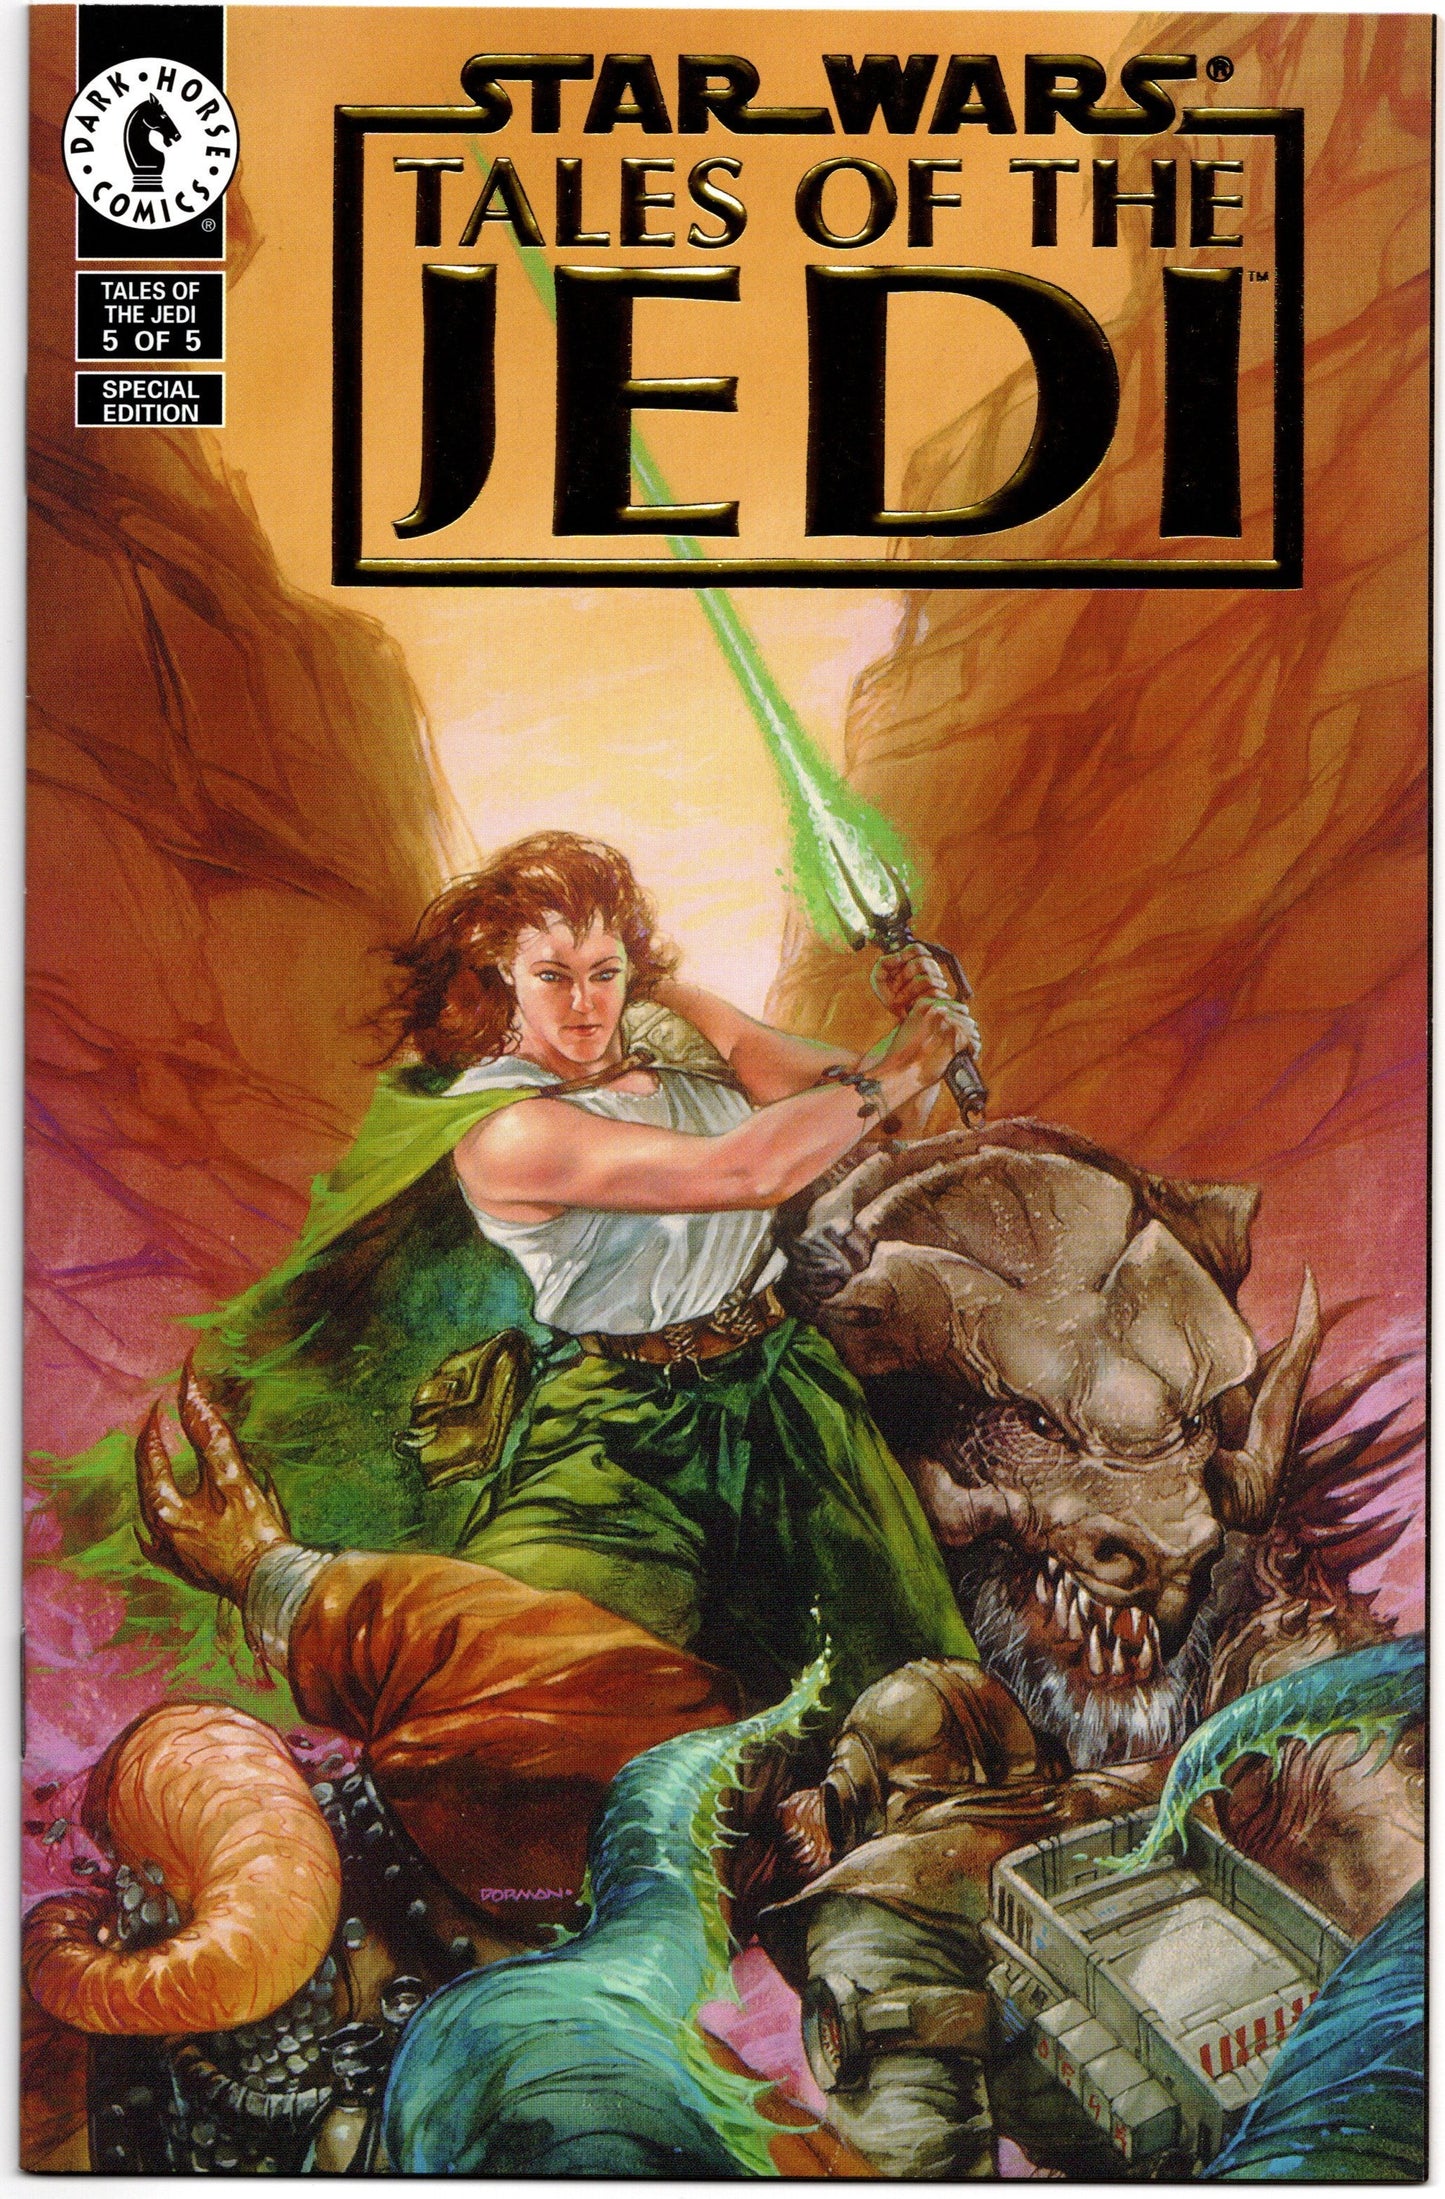 Star Wars Tales of the Jedi #5 - Édition feuille d'or